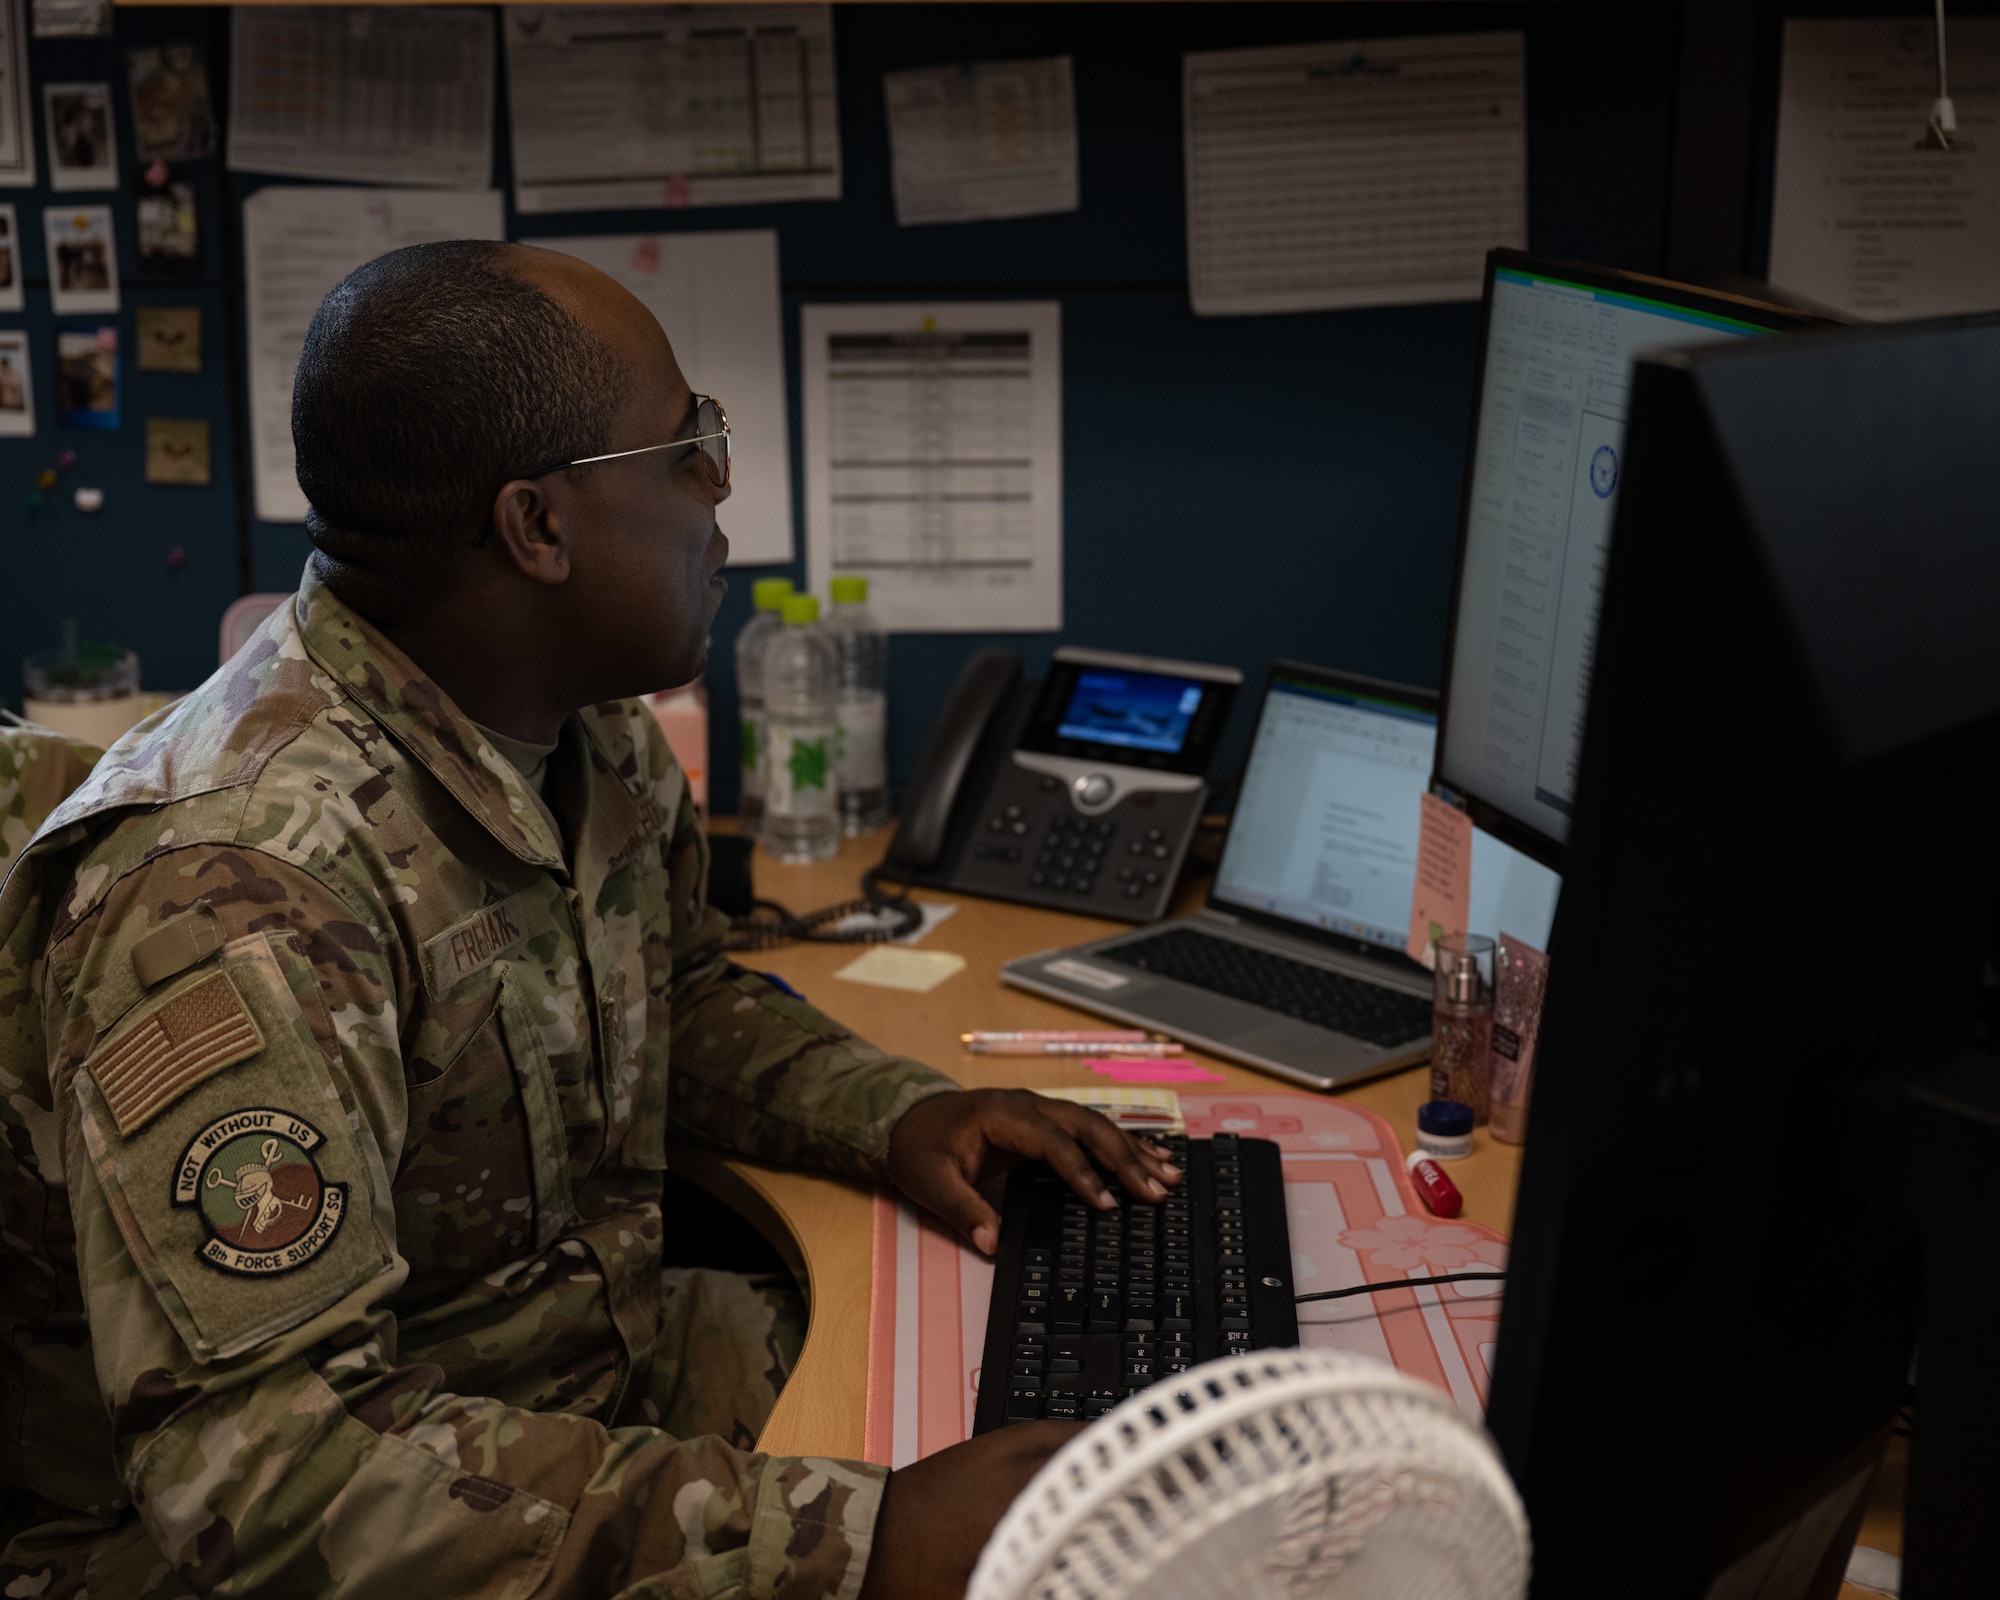 Senior Airman Bernard Freeman, 8th Force Support Squadron personnel systems manager, reviews personnel records at Kunsan Air Base, Republic of Korea